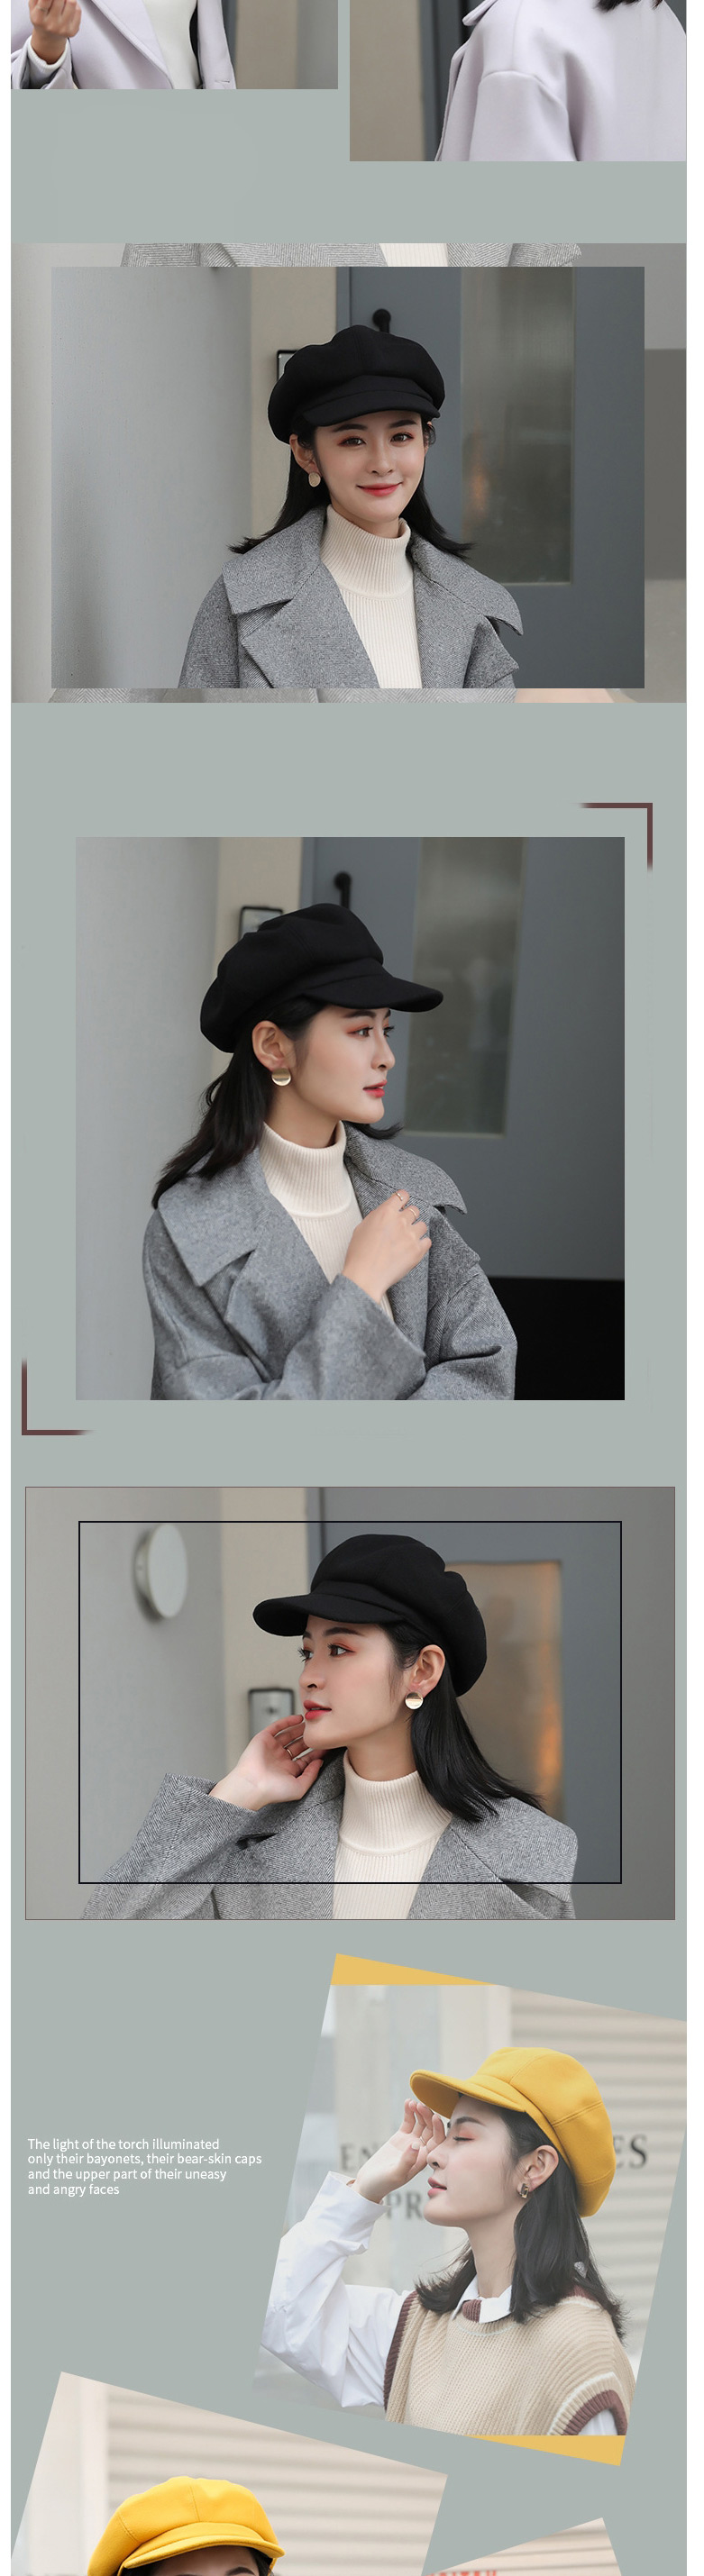 Fashion Adult Skin Red Woolen Solid Color Stitching Parent-child Octagonal Beret,Knitting Wool Hats